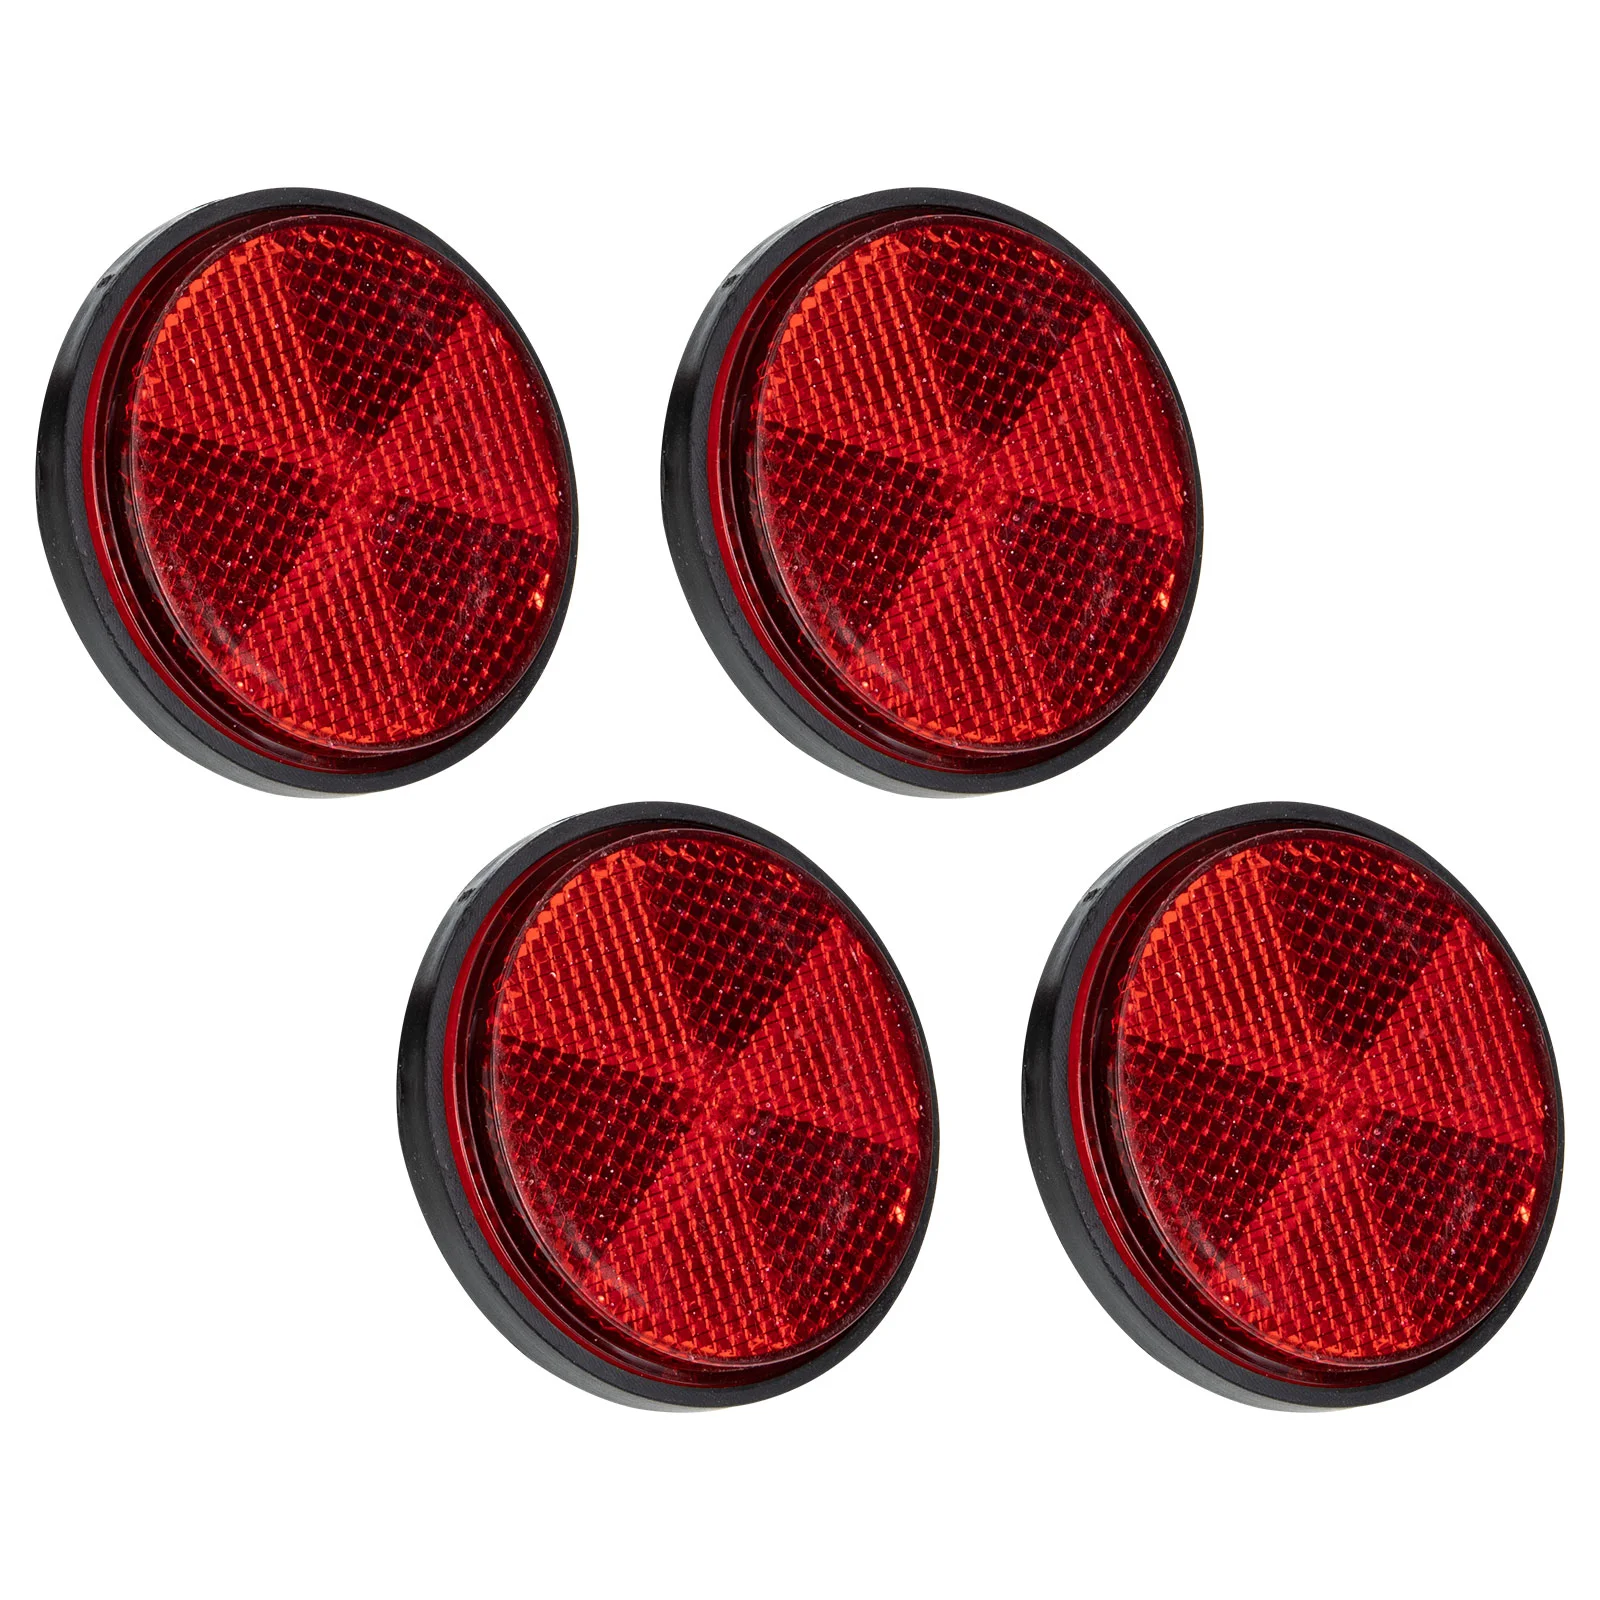 

Bike Reflector Light Reflectors Reflective Car Rear Safety Round Lights Plastic Sign Tape Warning Lamp Front Tail Trailer Cart